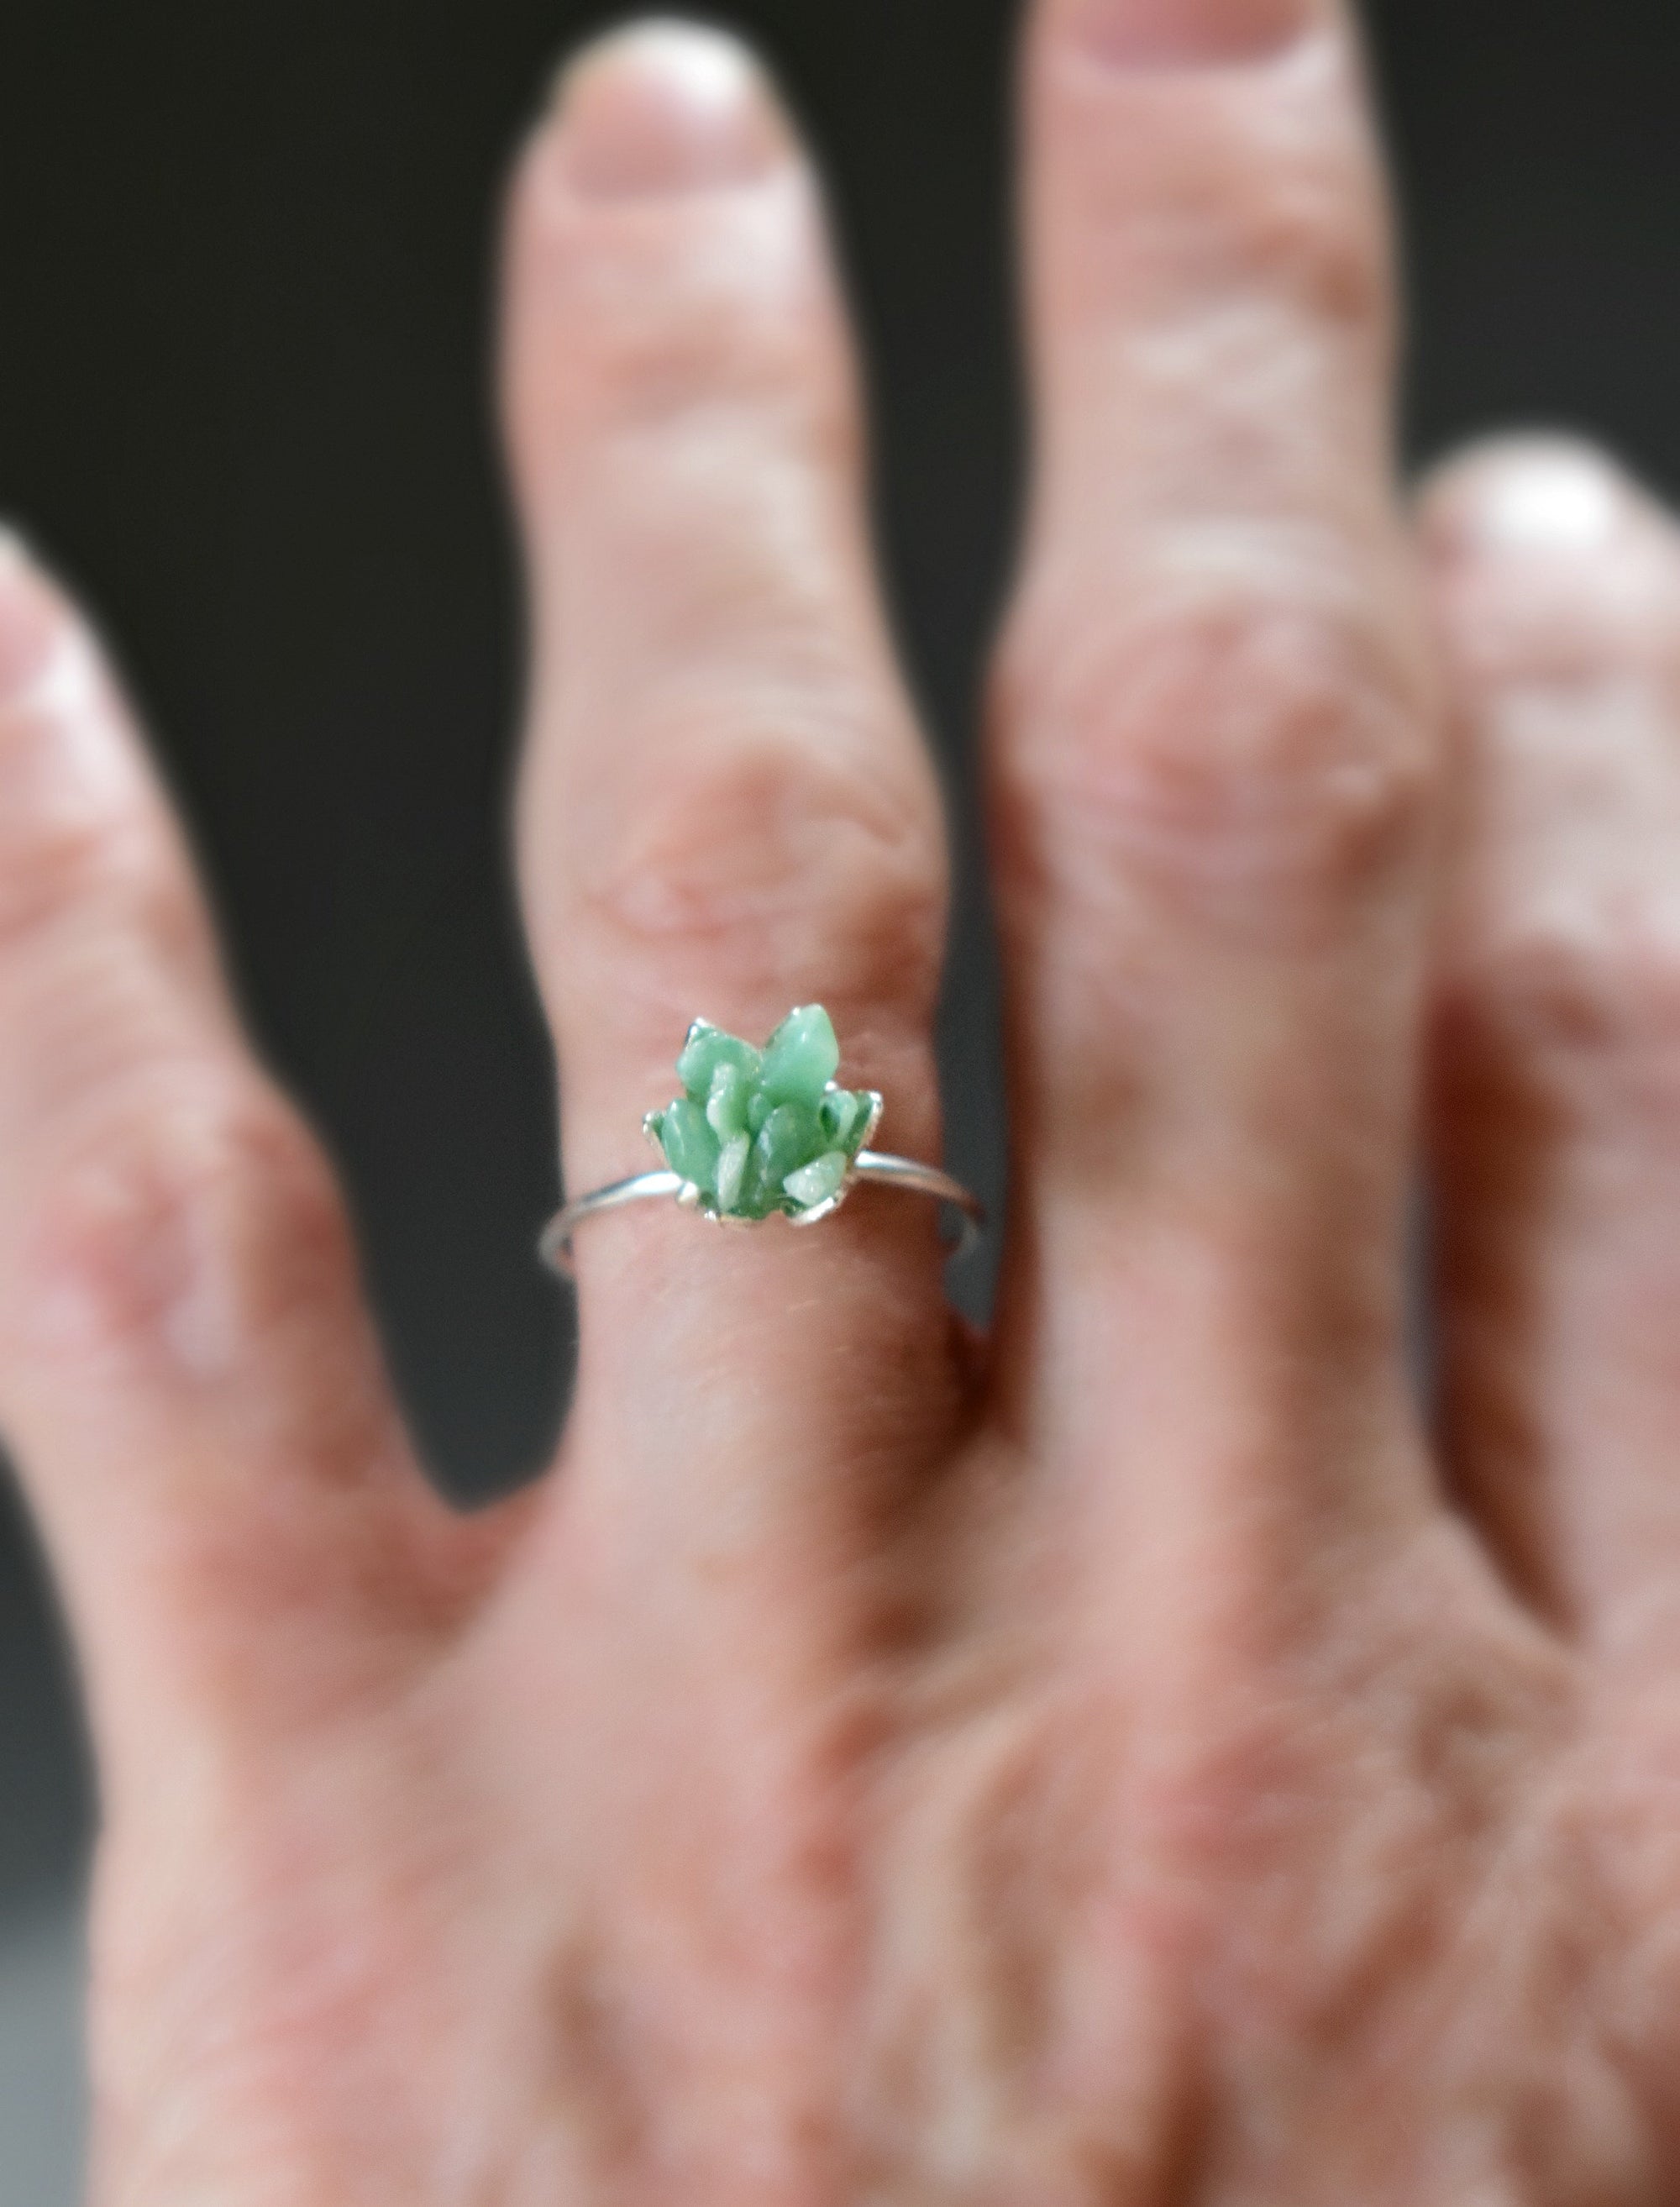 Green Aventurine Ring, Natural Green Gemstone Jewelry, Best Selling Rings for Women, Manifest Wealth Abundance, Birthday for Wife, Daughter